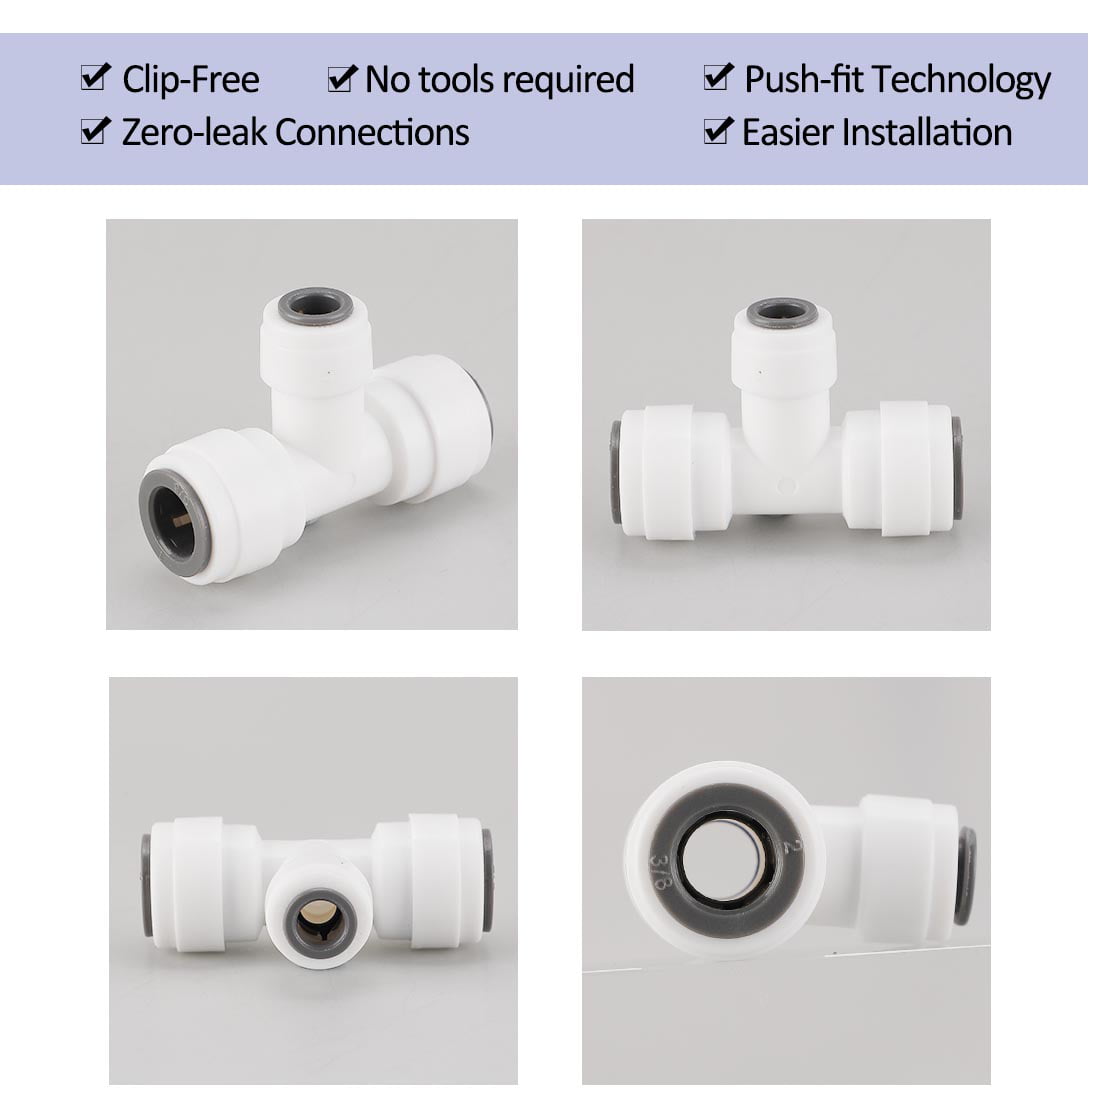 Tulead Quick Connect Fittings Straight Quick Connector Water Fittings Water Purifiers Quick Adapter 1/4 to 3/8 OD Tube Connector Fitting Pack of 10 